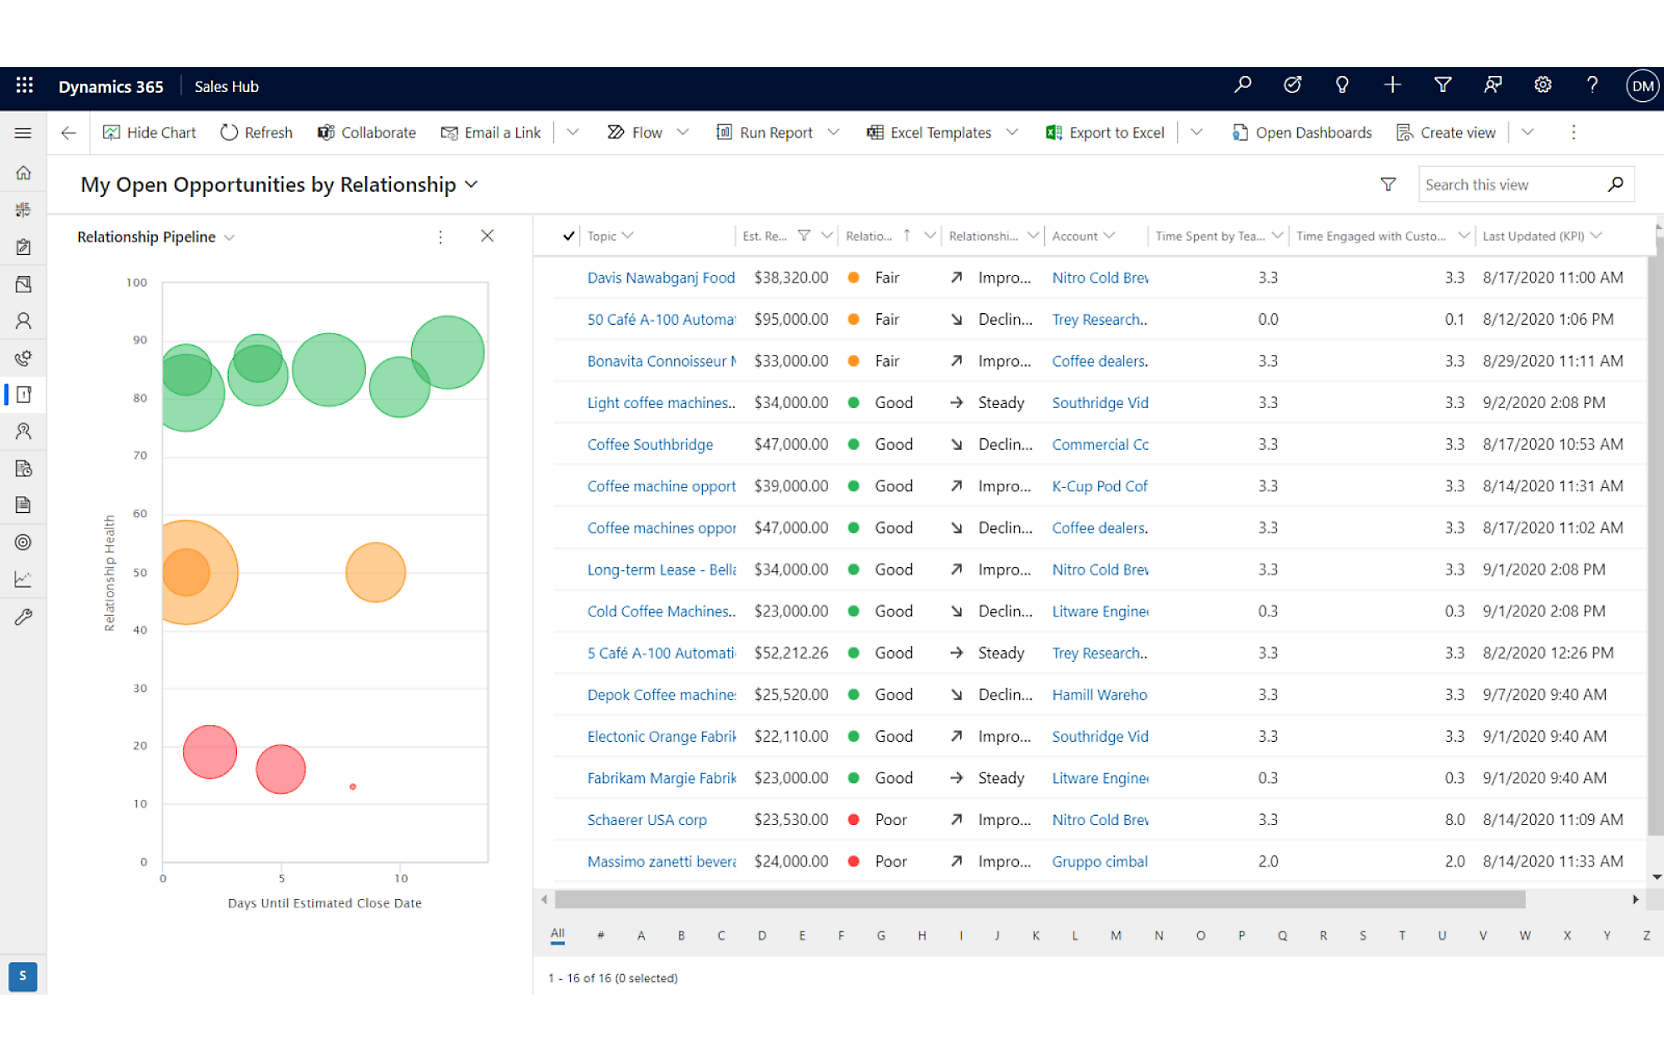 A screenshot of a Dynamics 365 Sales Hub dashboard showing a scatter plot chart and a table of open opportunities sorted by relationship